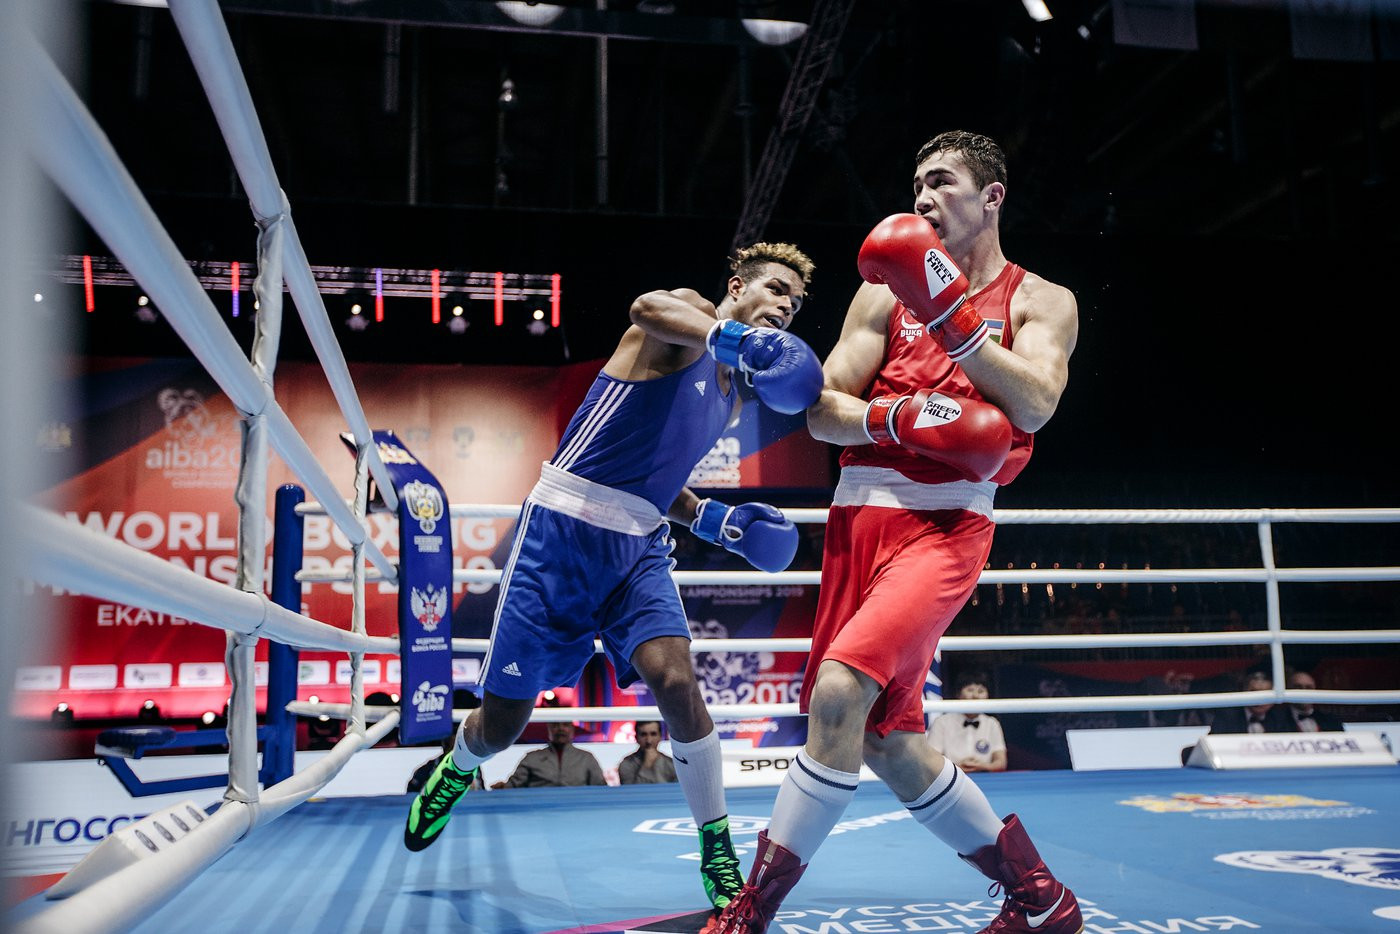 AIBA Men's World Championships 2019: Day 11 of competition